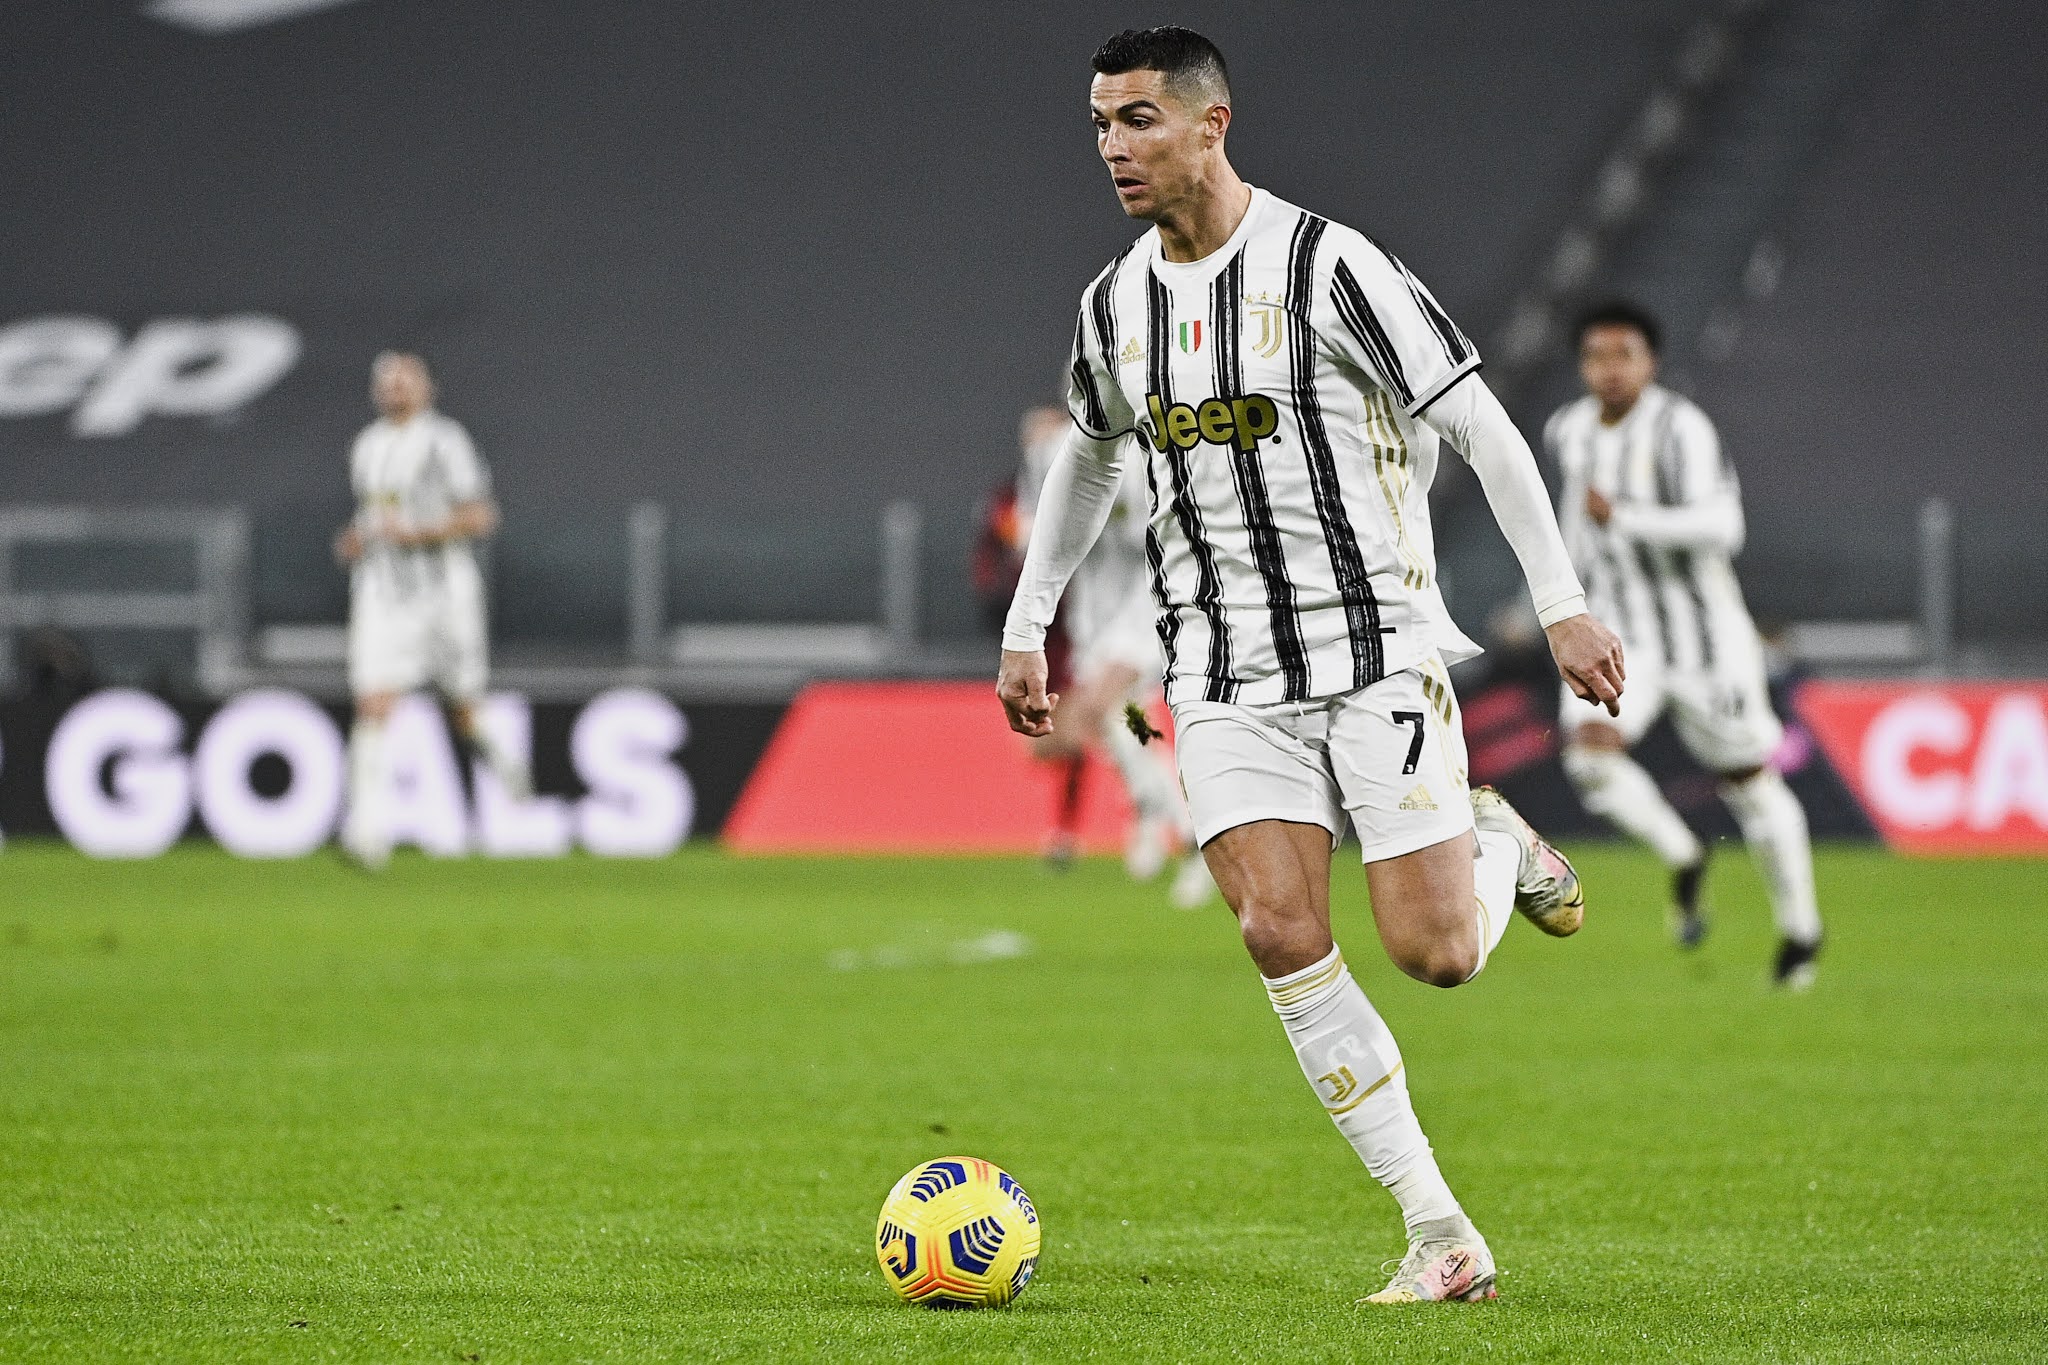 Cristiano Ronaldo's Juventus will be hoping to get back to winning ways against Spezia in midweek action